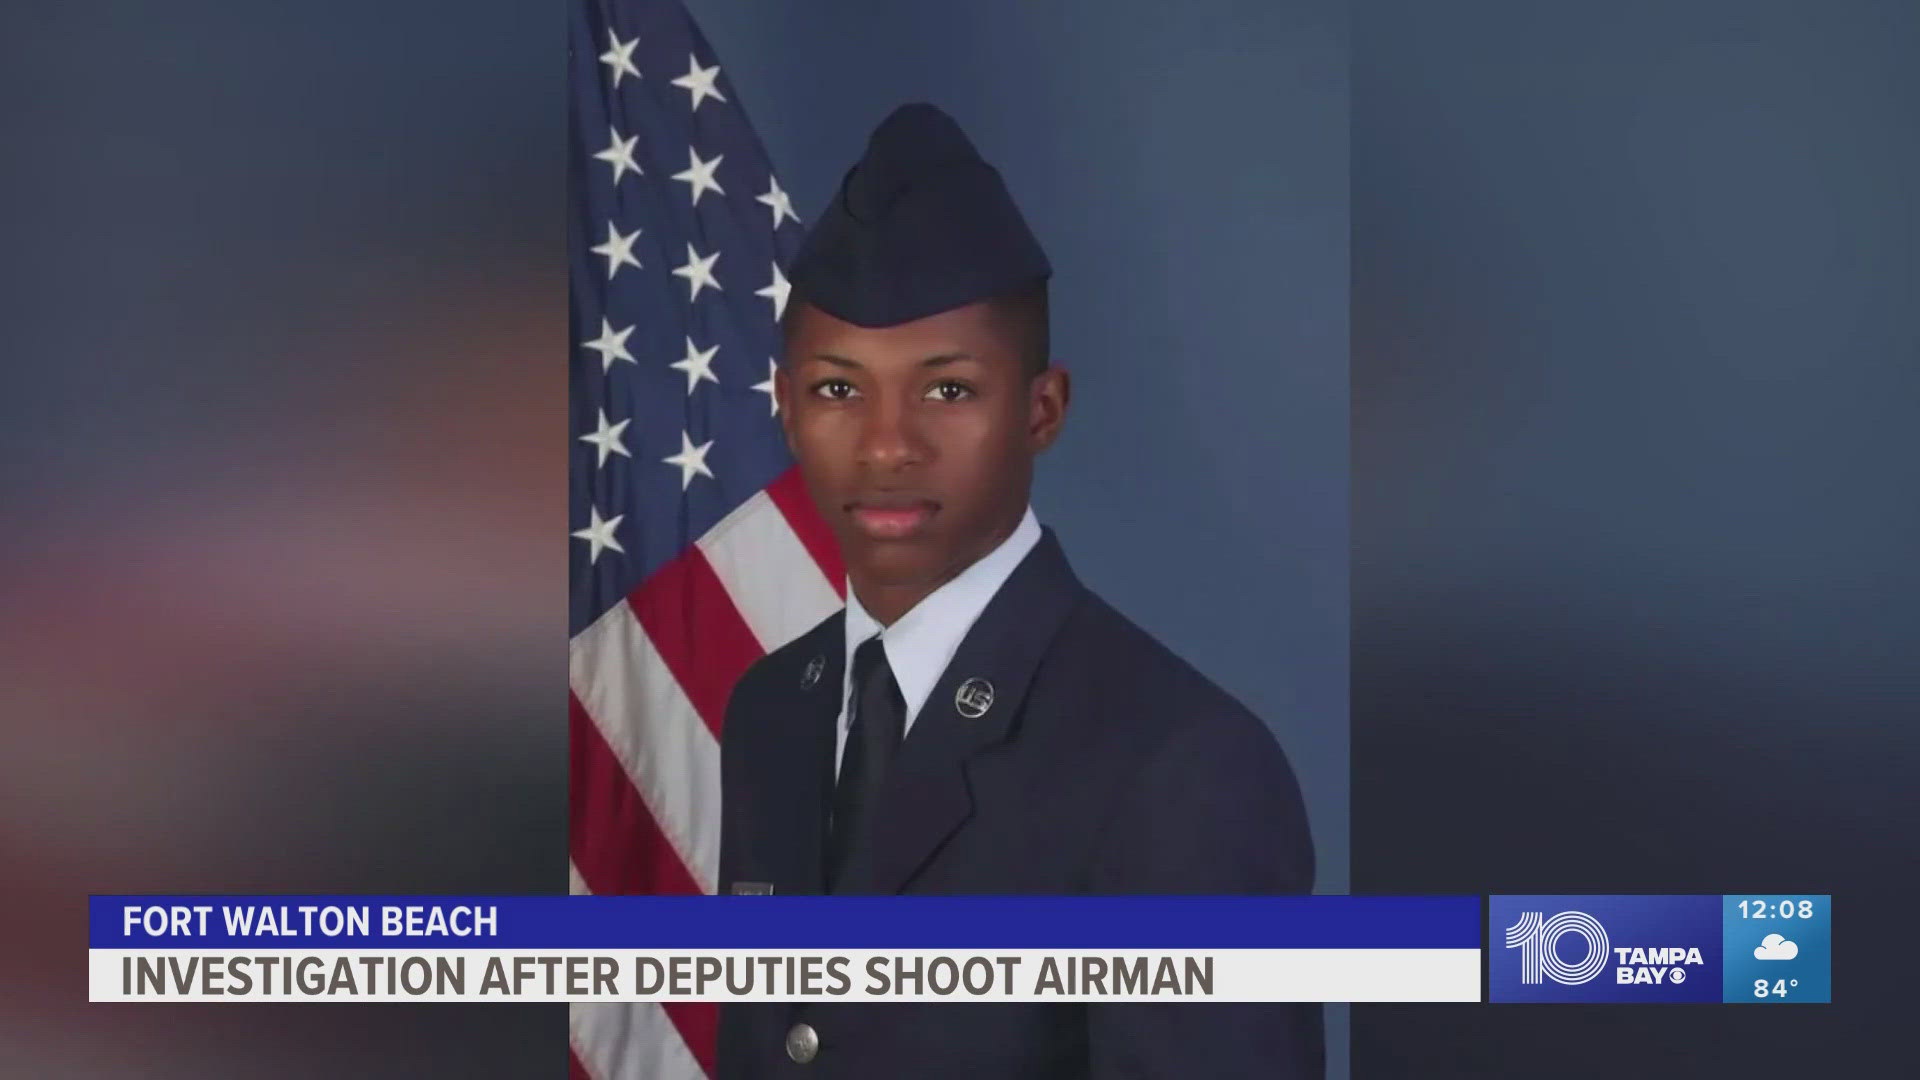 There are more questions about the deadly shooting of a U.S. airman in his apartment in Fort Walton Beach.